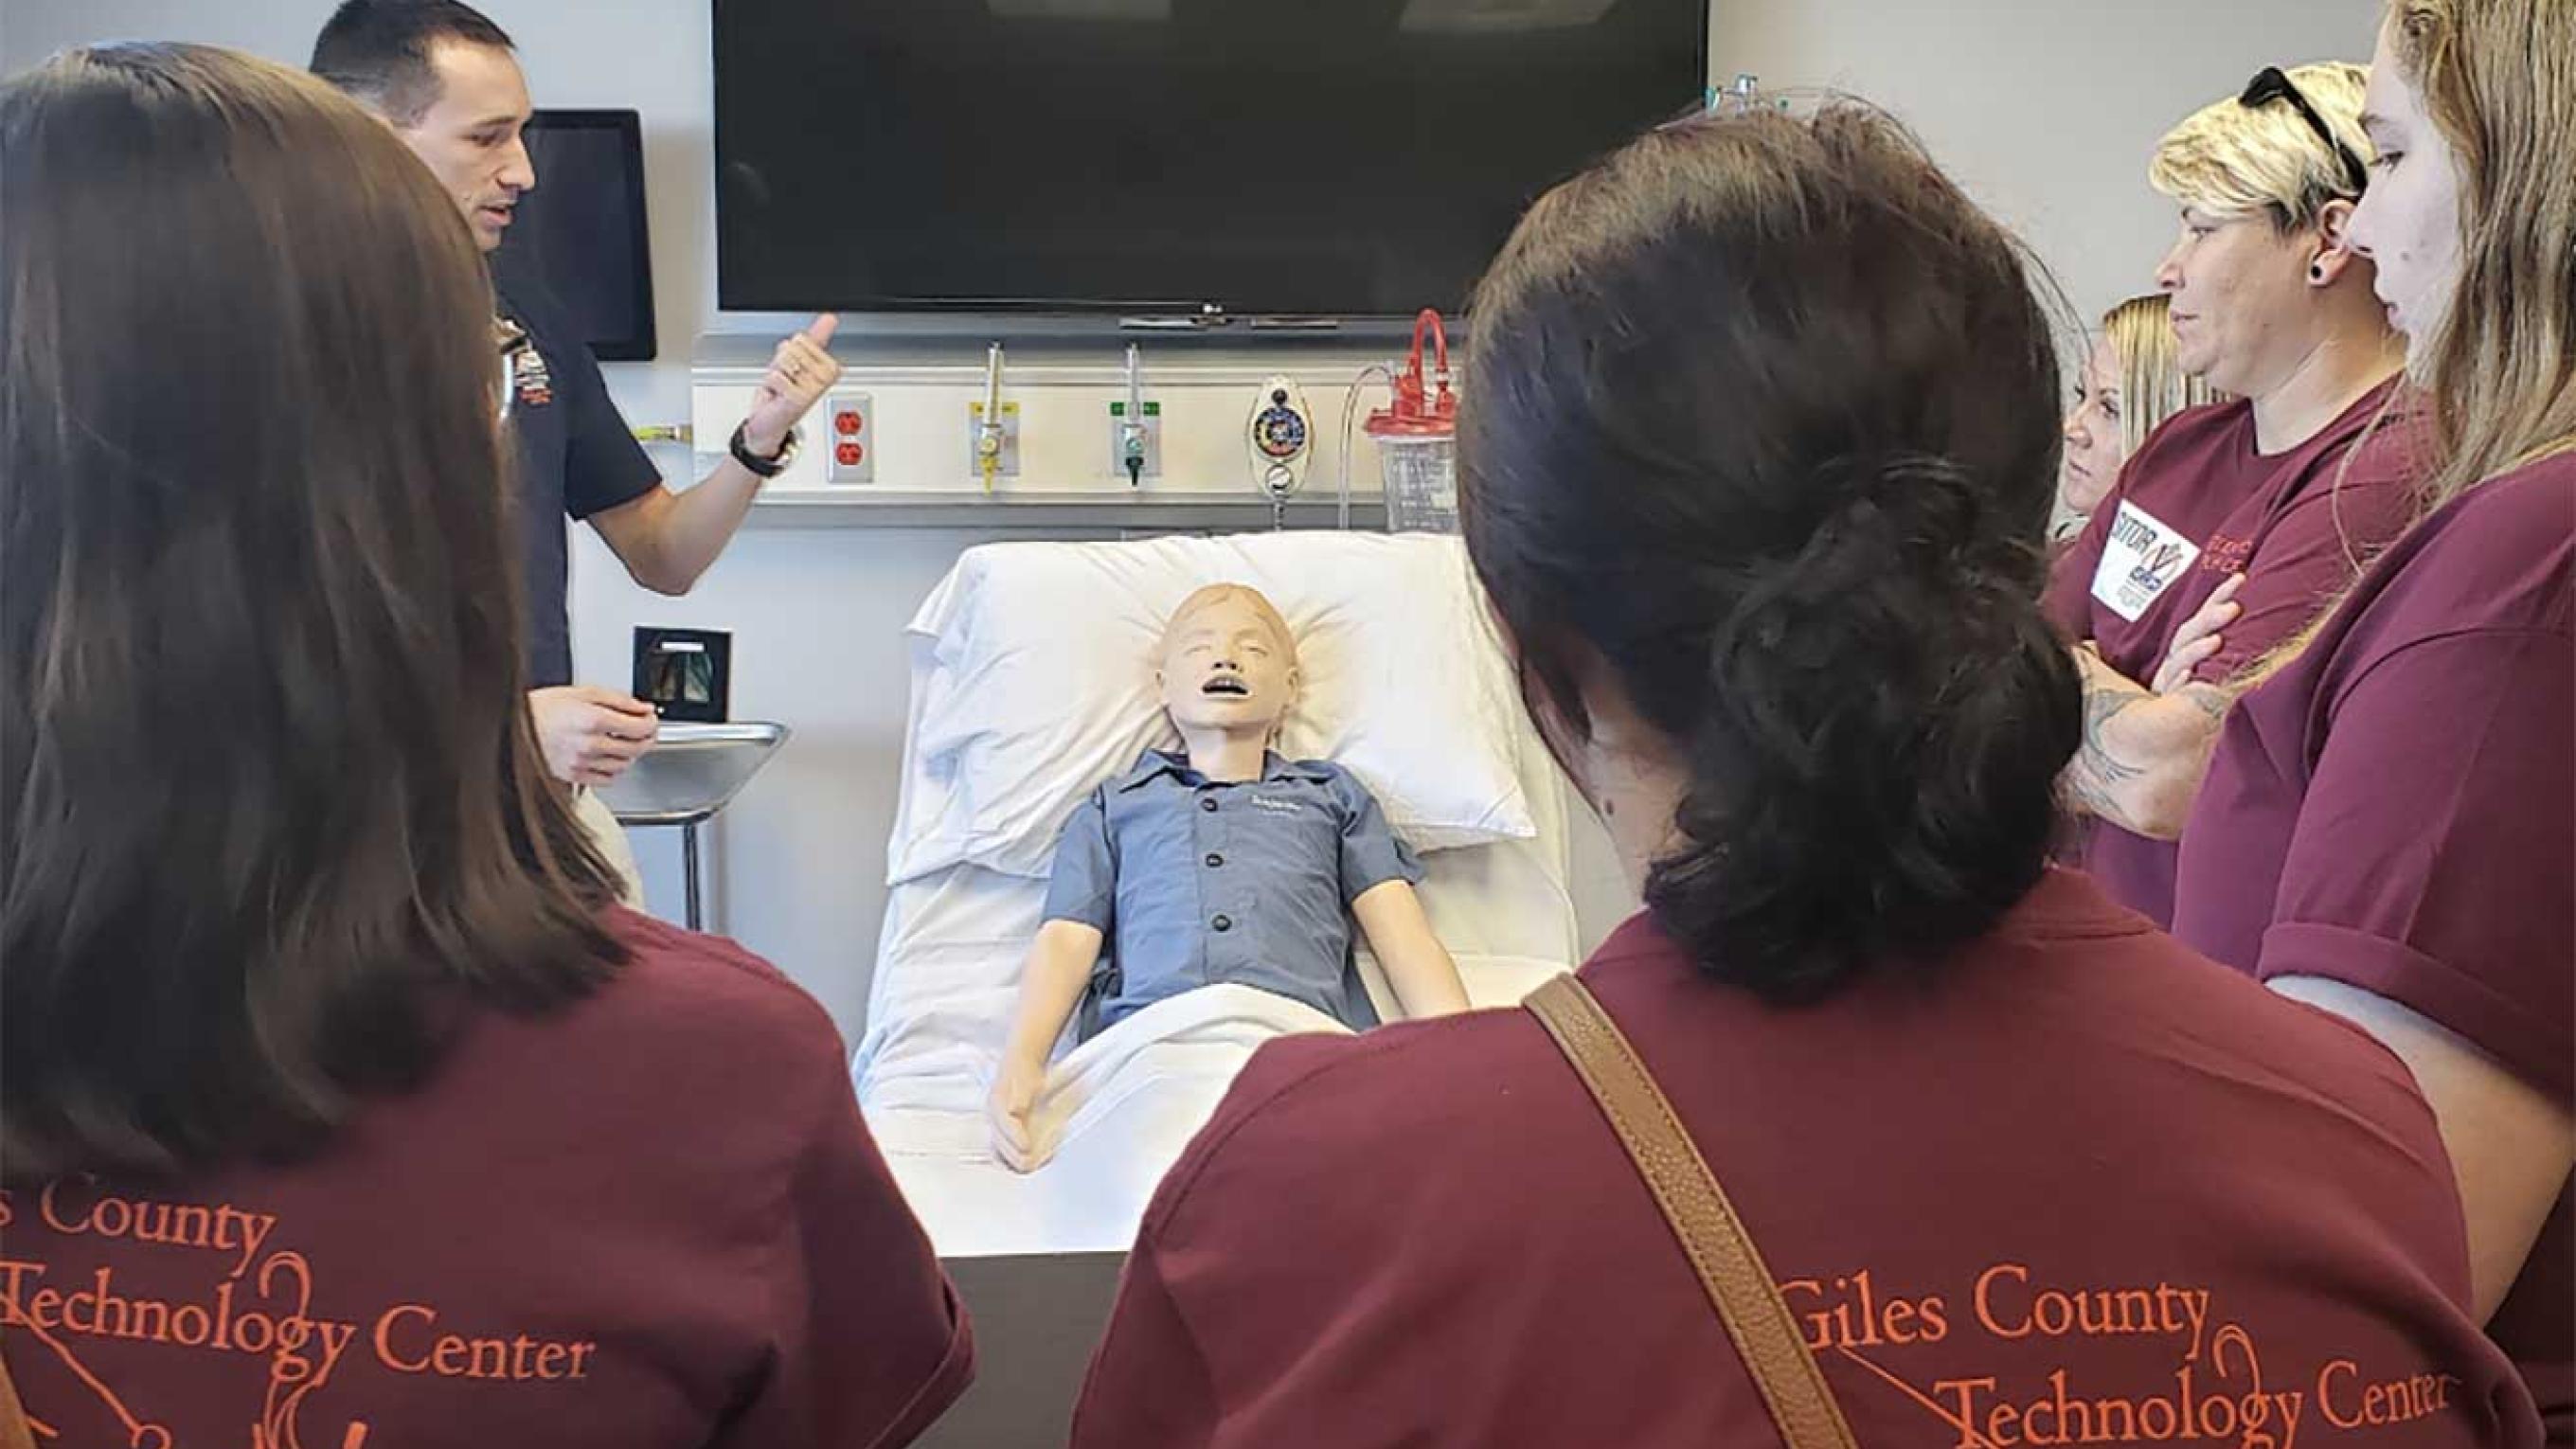 High school students gathered in a simulation center room